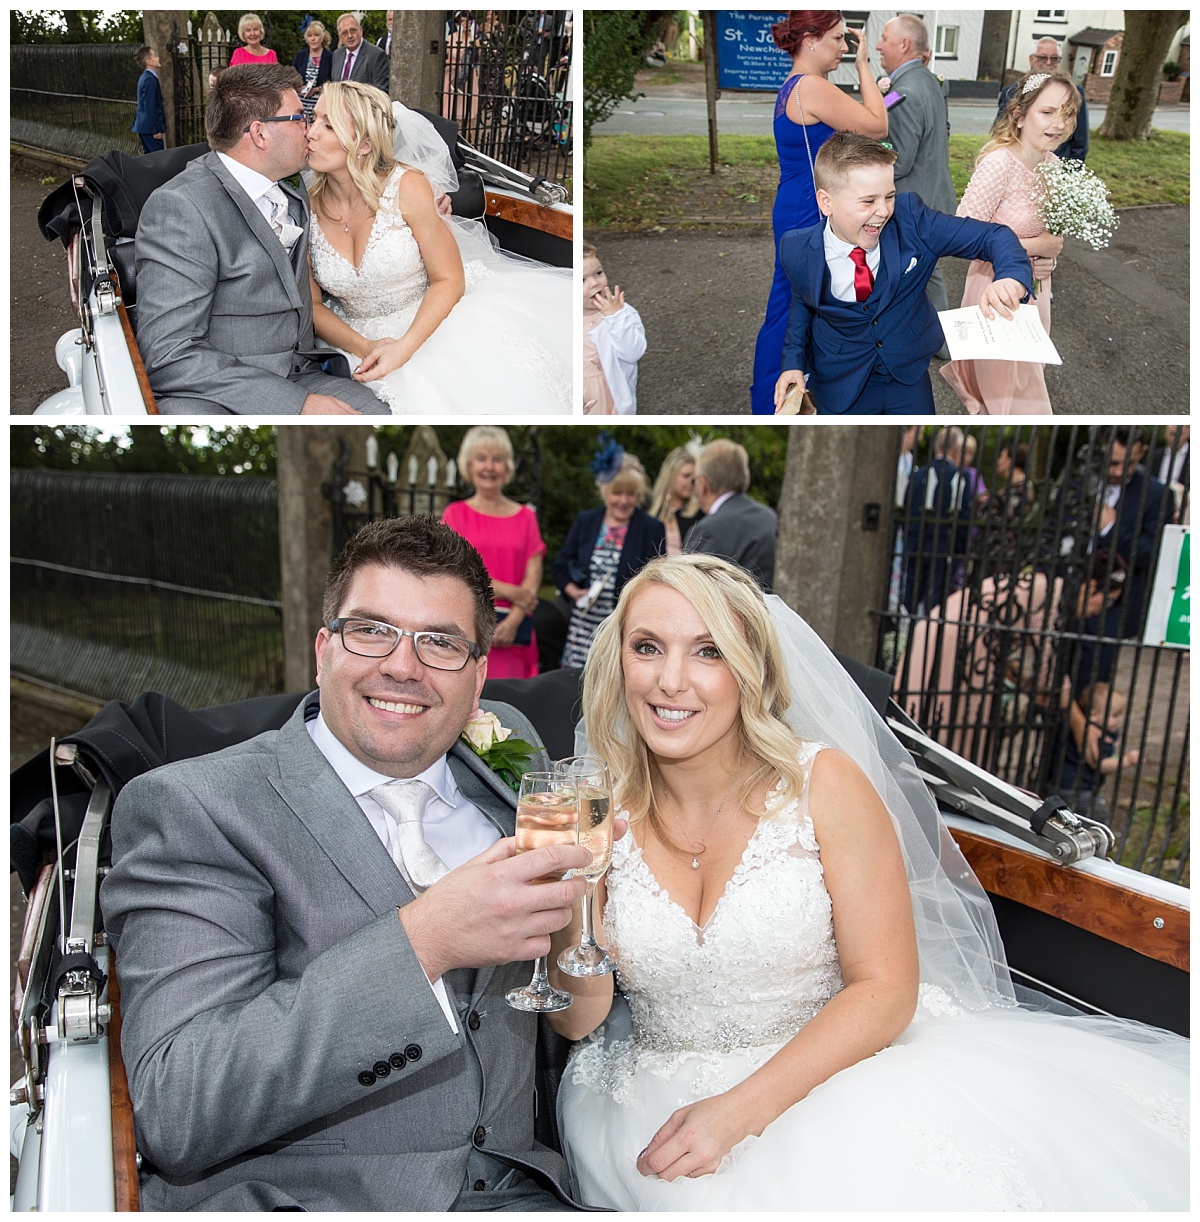 Wedding Photography Manchester - Lisa and James's The Three Horseshoes Country Inn wedding 20